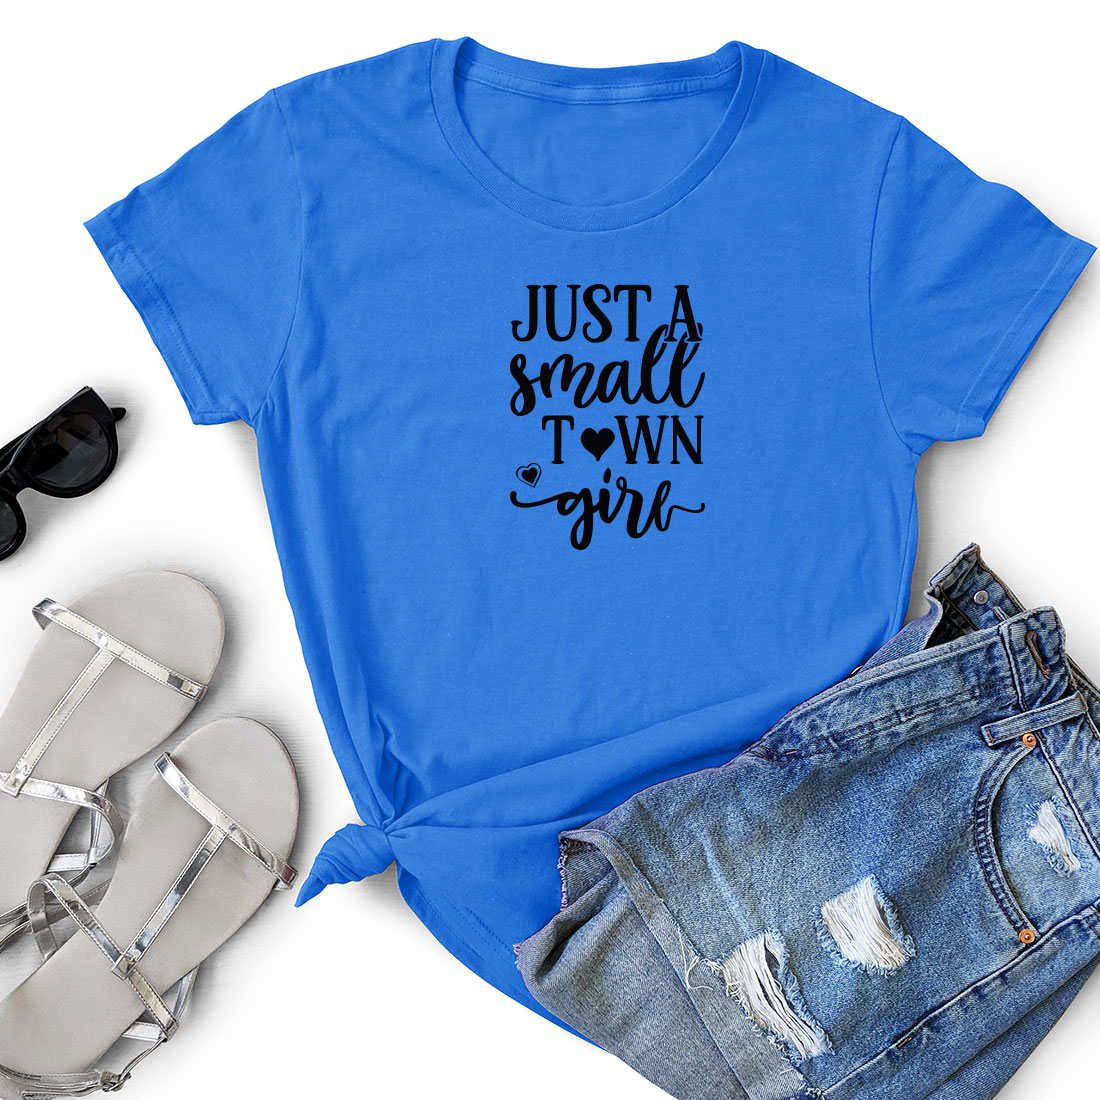 T - shirt that says just a small town girl next to a pair of.